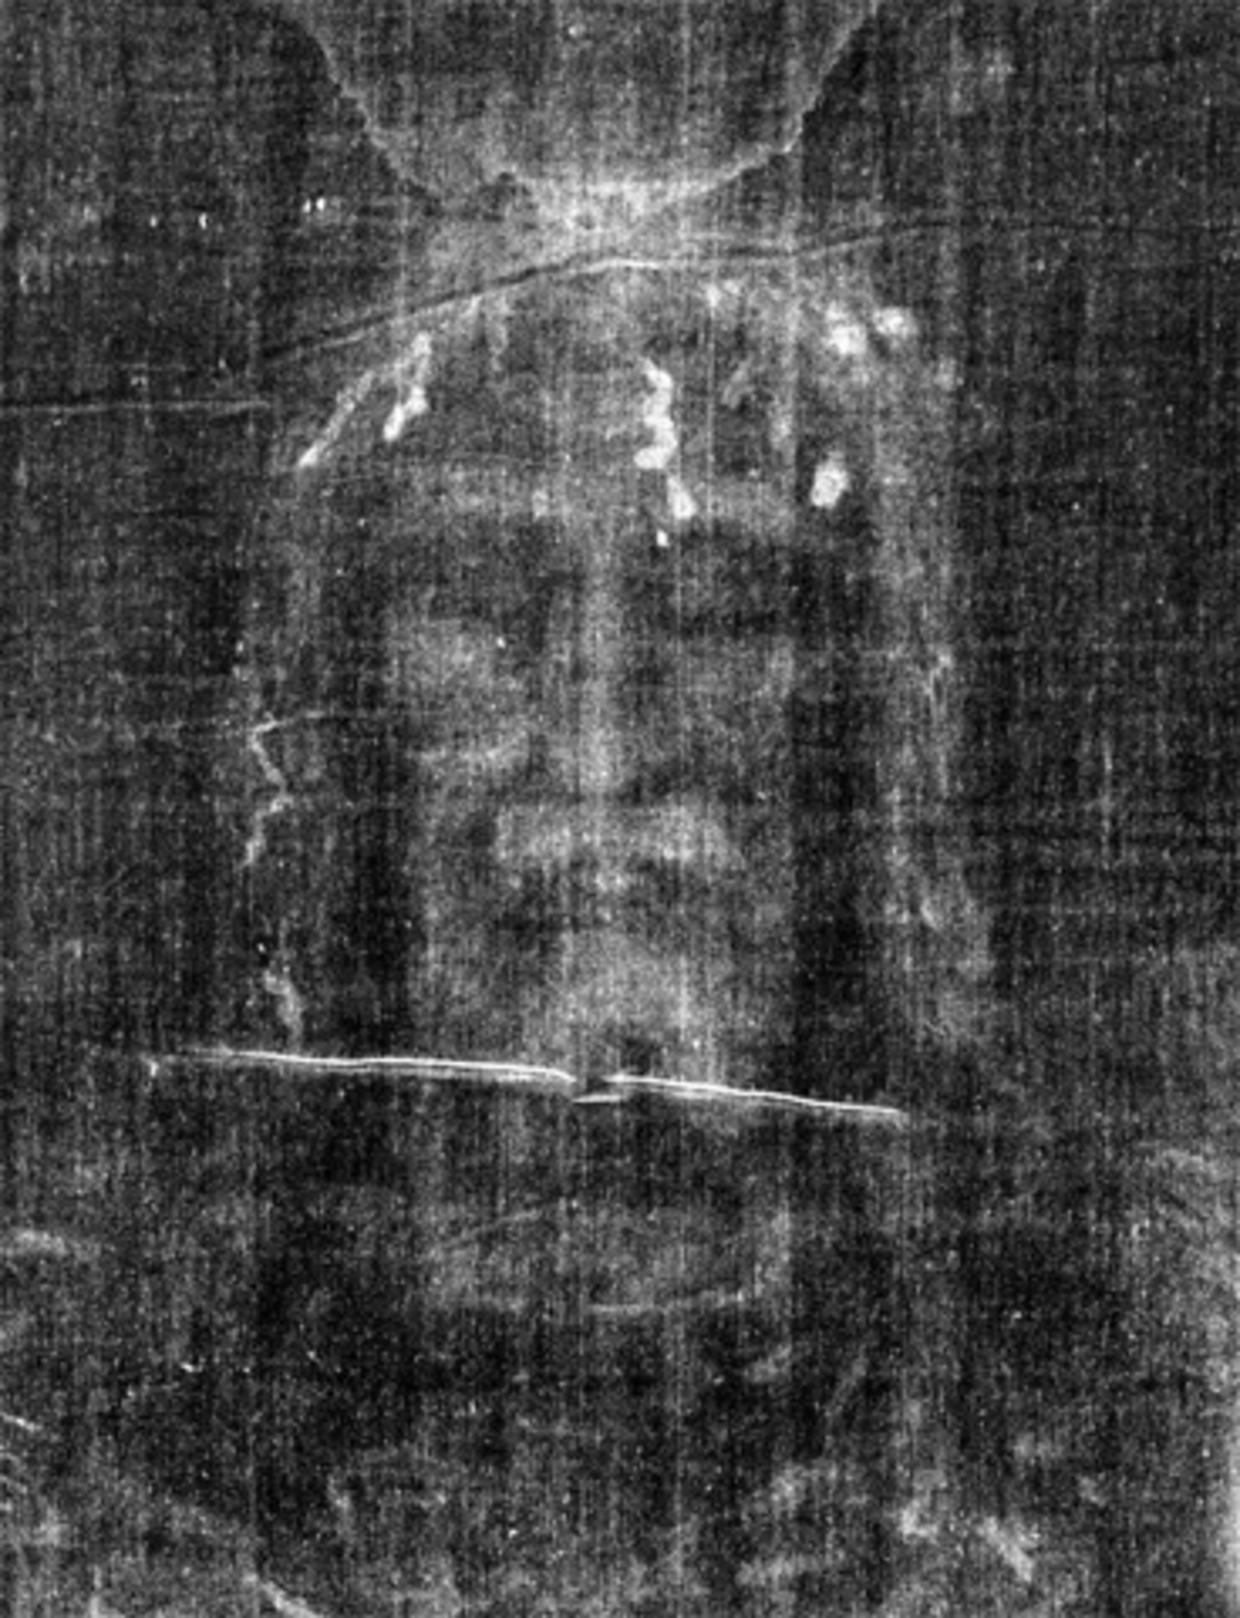 pictures of jesus shroud of turin